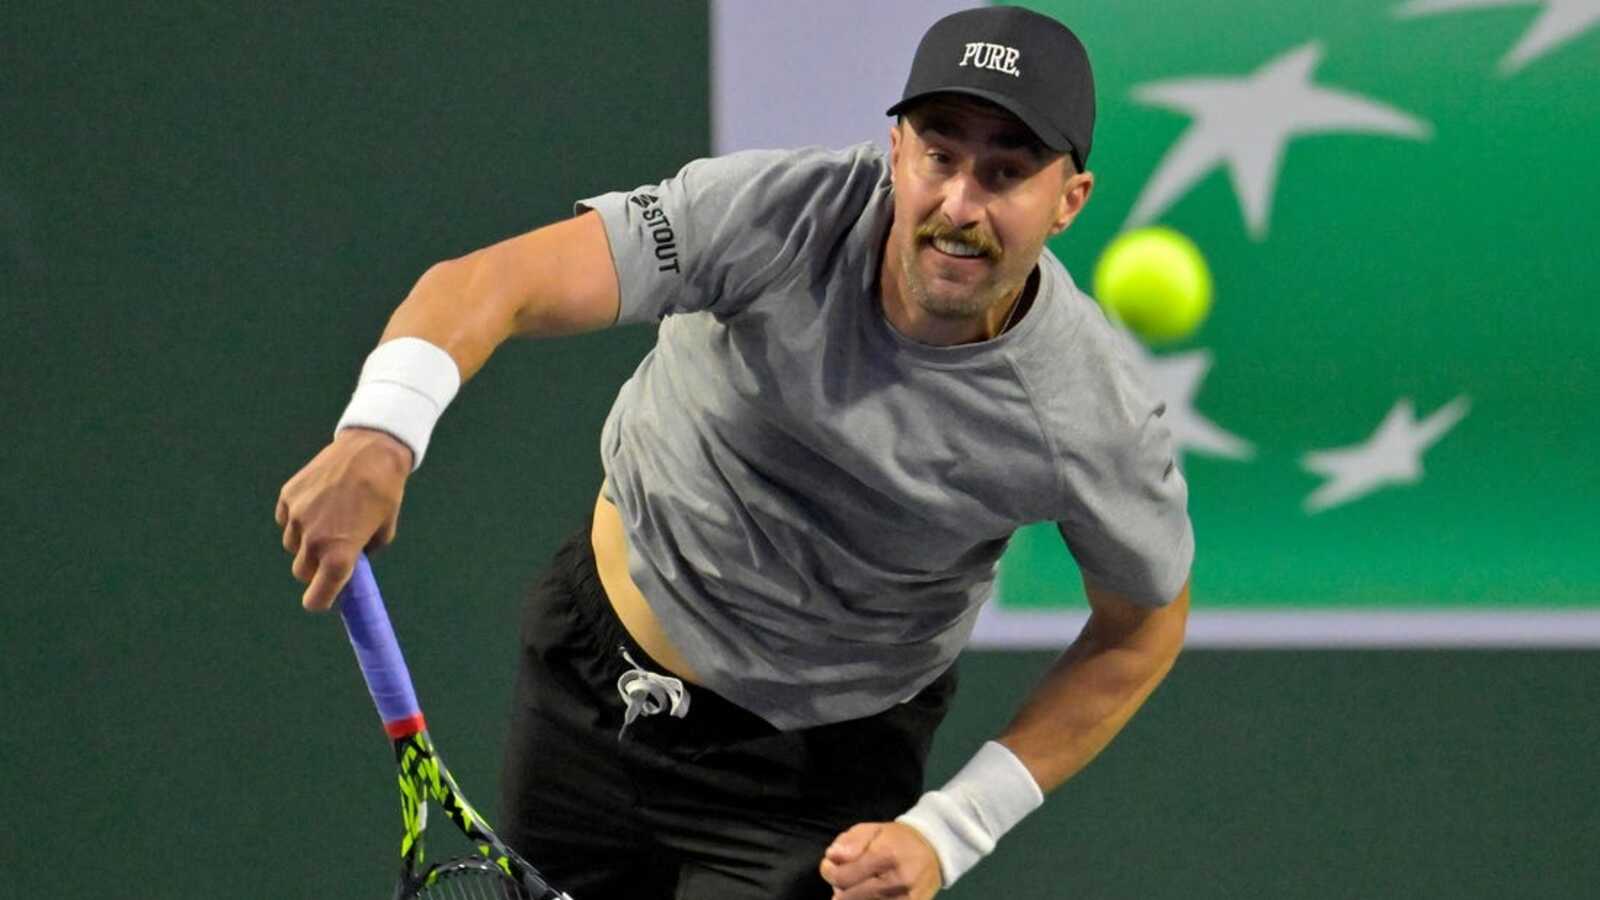 Steve Johnson retires after 12 years on tour